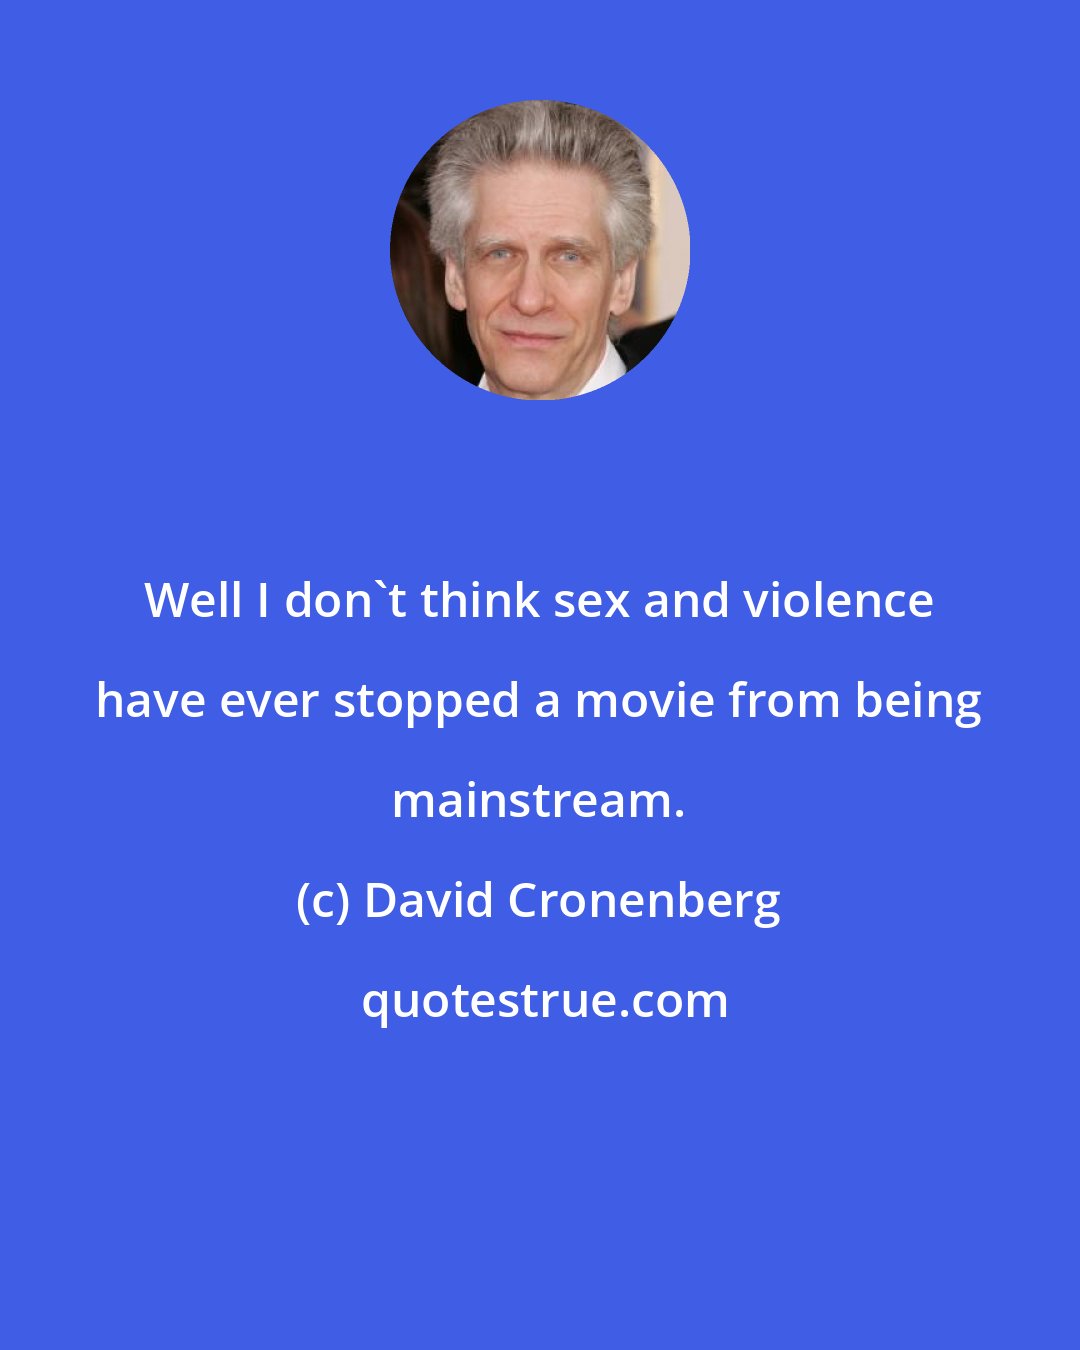 David Cronenberg: Well I don't think sex and violence have ever stopped a movie from being mainstream.